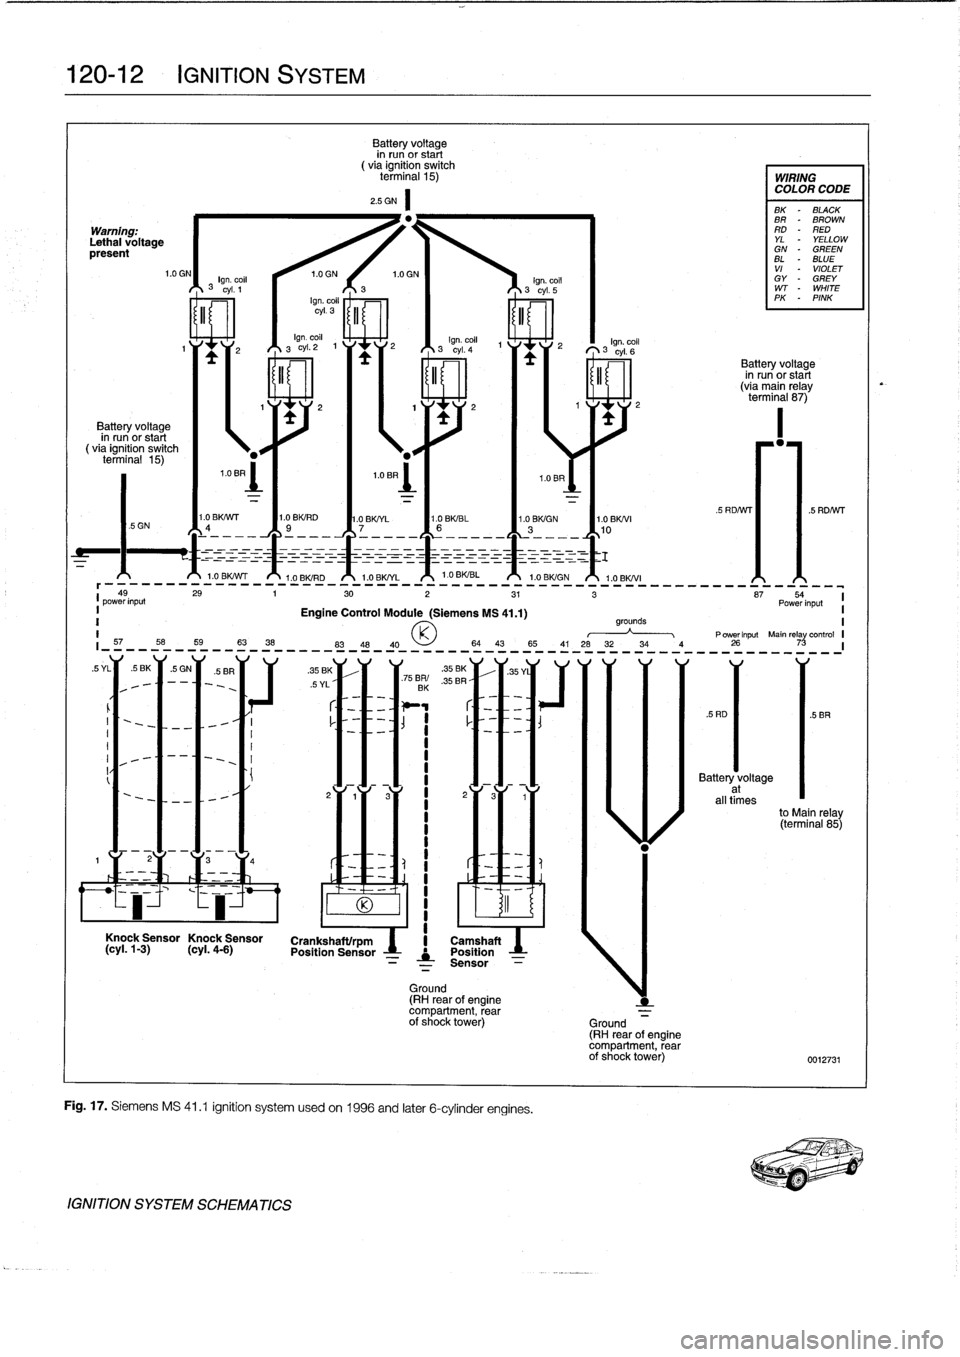 BMW 328i 1994 E36 Service Manual 
120-12

	

IGNITION
SYSTEM

Warning
.
Lethal
voltagepresent

Battery
voltage
in
run
or
start
(via
ignitíon
switch
terminal
15)

I
t

IGNITION
SYSTEM
SCHEMATICS

Battery
voltage
in
run
or
start
(
via